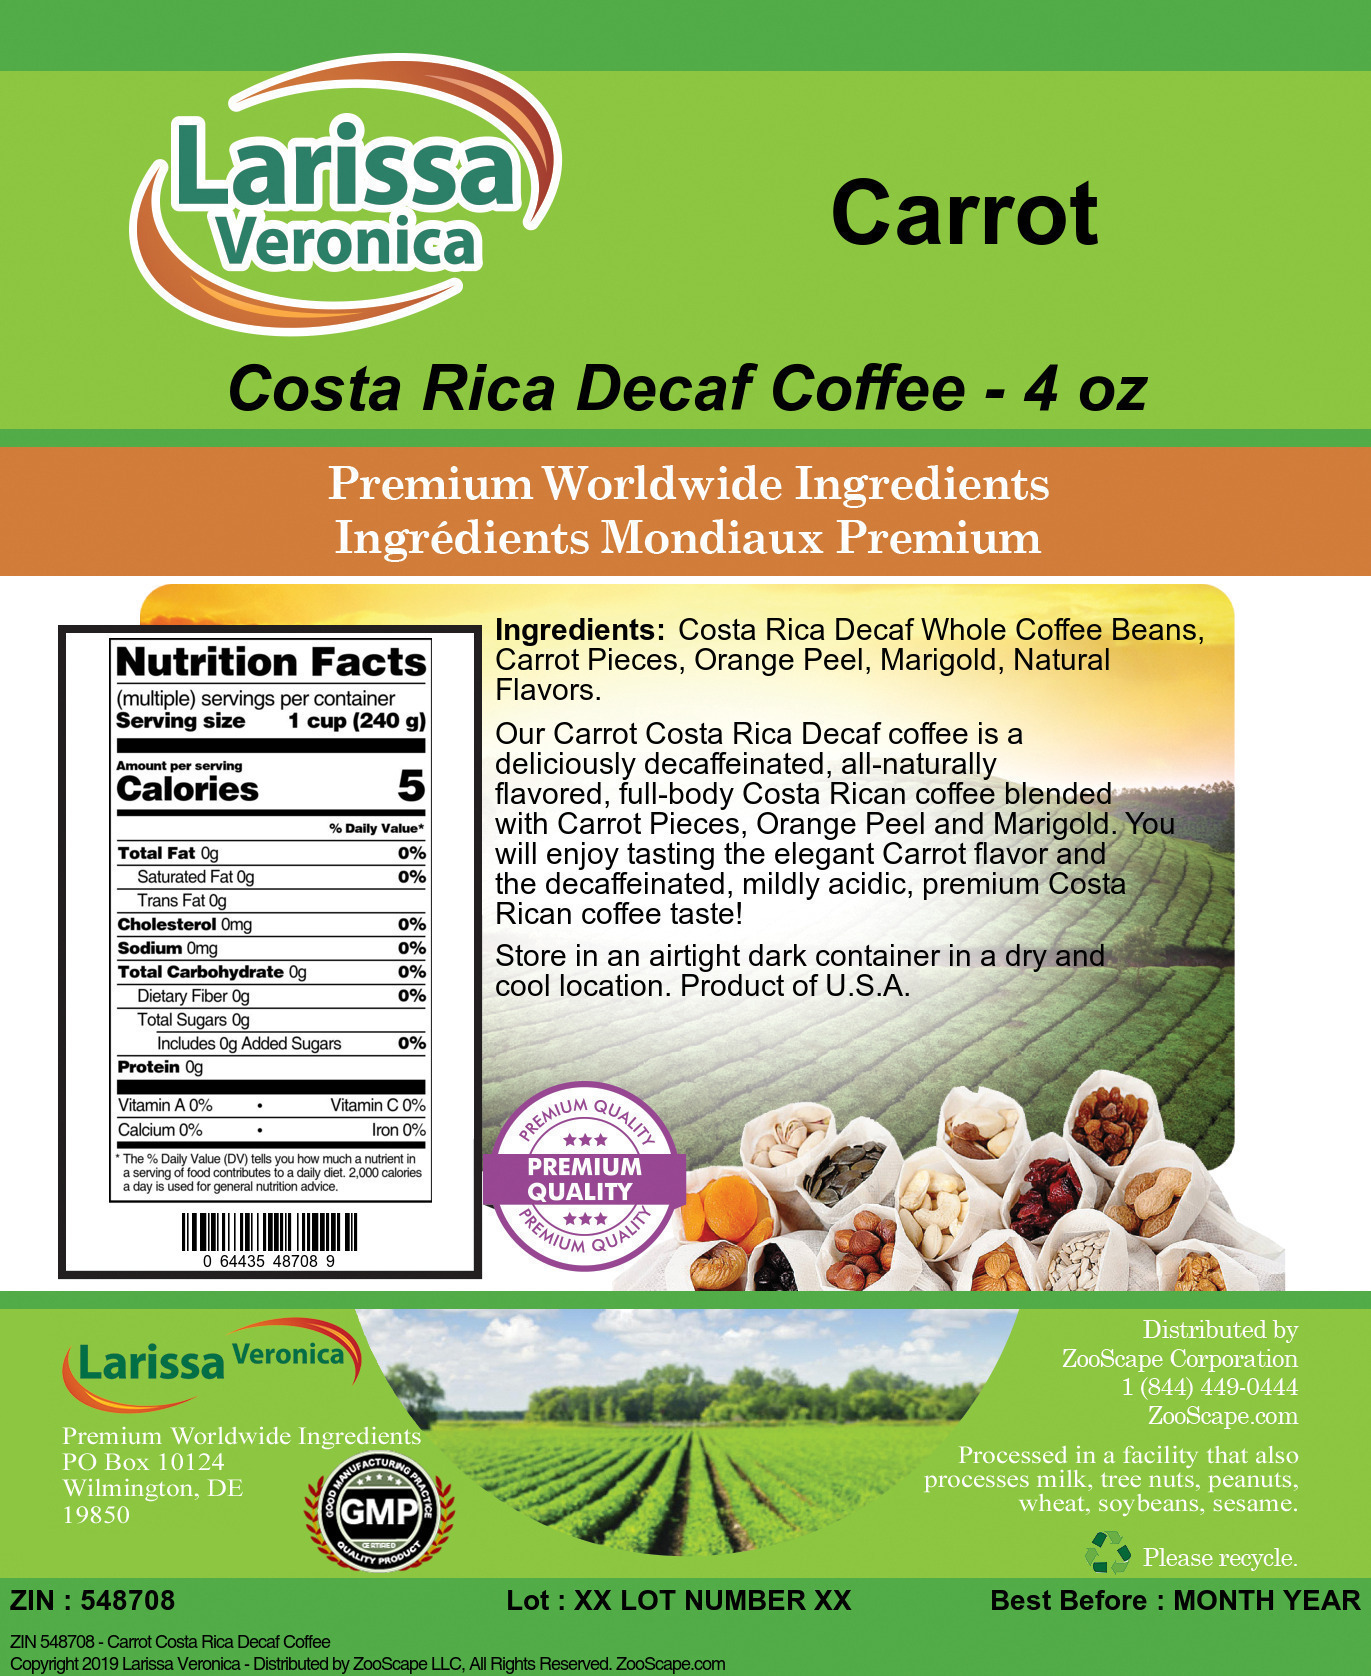 Carrot Costa Rica Decaf Coffee - Label